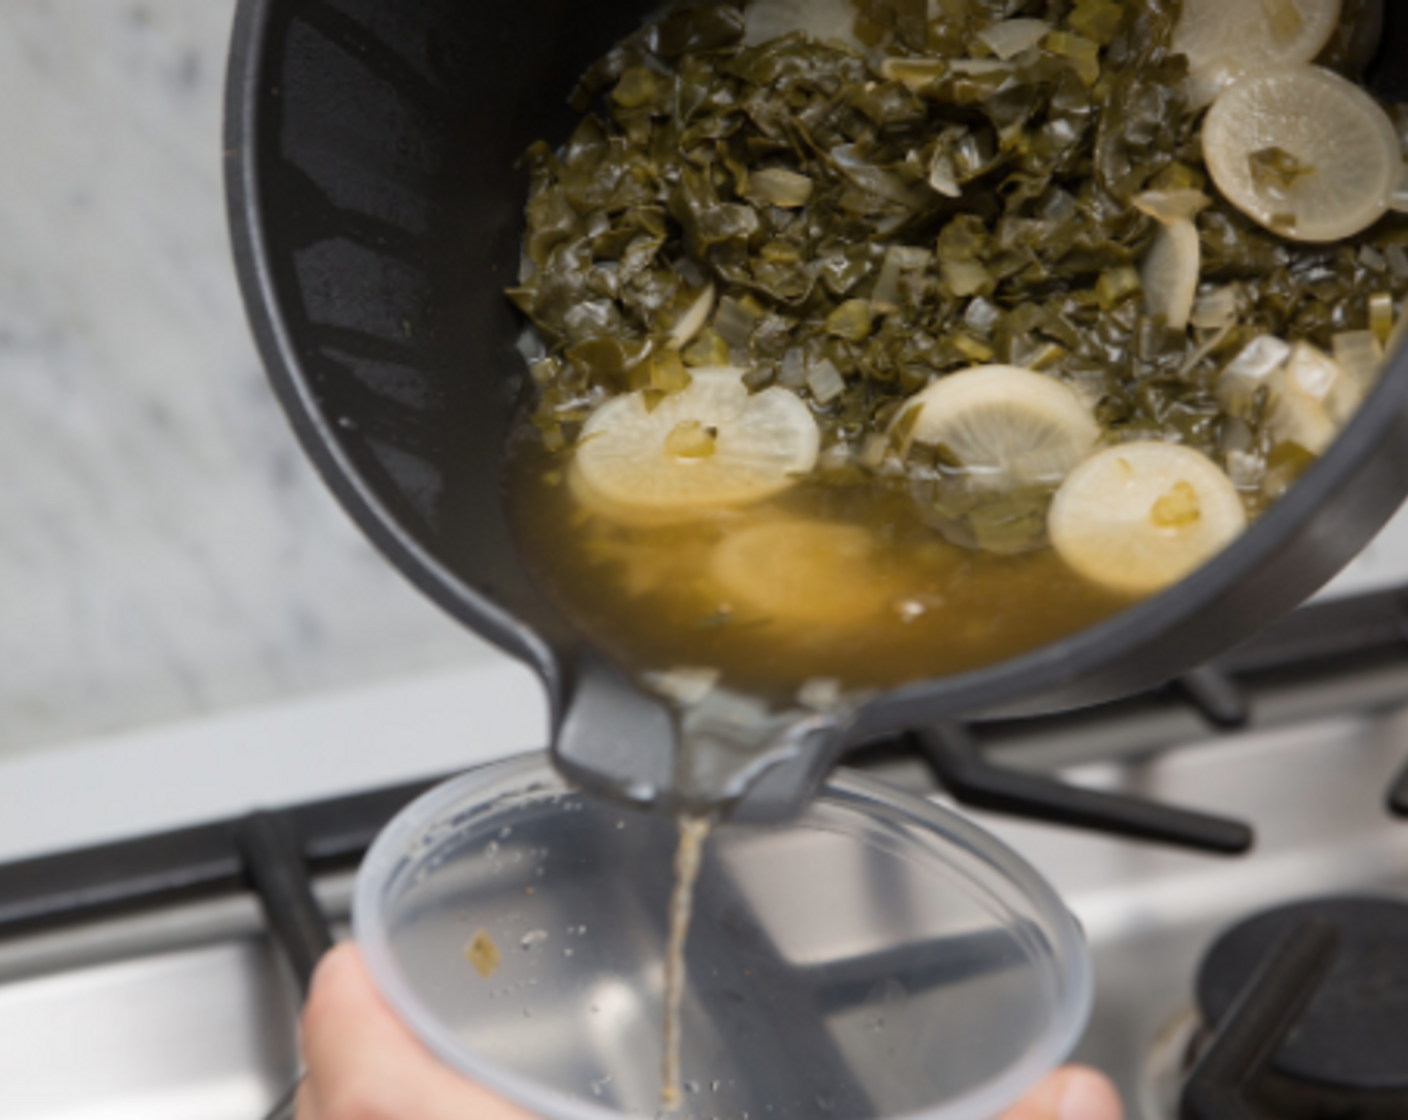 step 5 Add collard greens leaves and Water (2 cups). Stir in Pepper Jelly (1 Tbsp) and Salt (1/4 tsp). Bring to a boil, then reduce heat to achieve a slow and steady simmer. Cover and cook 25-35 minutes, or until greens and turnips are tender.